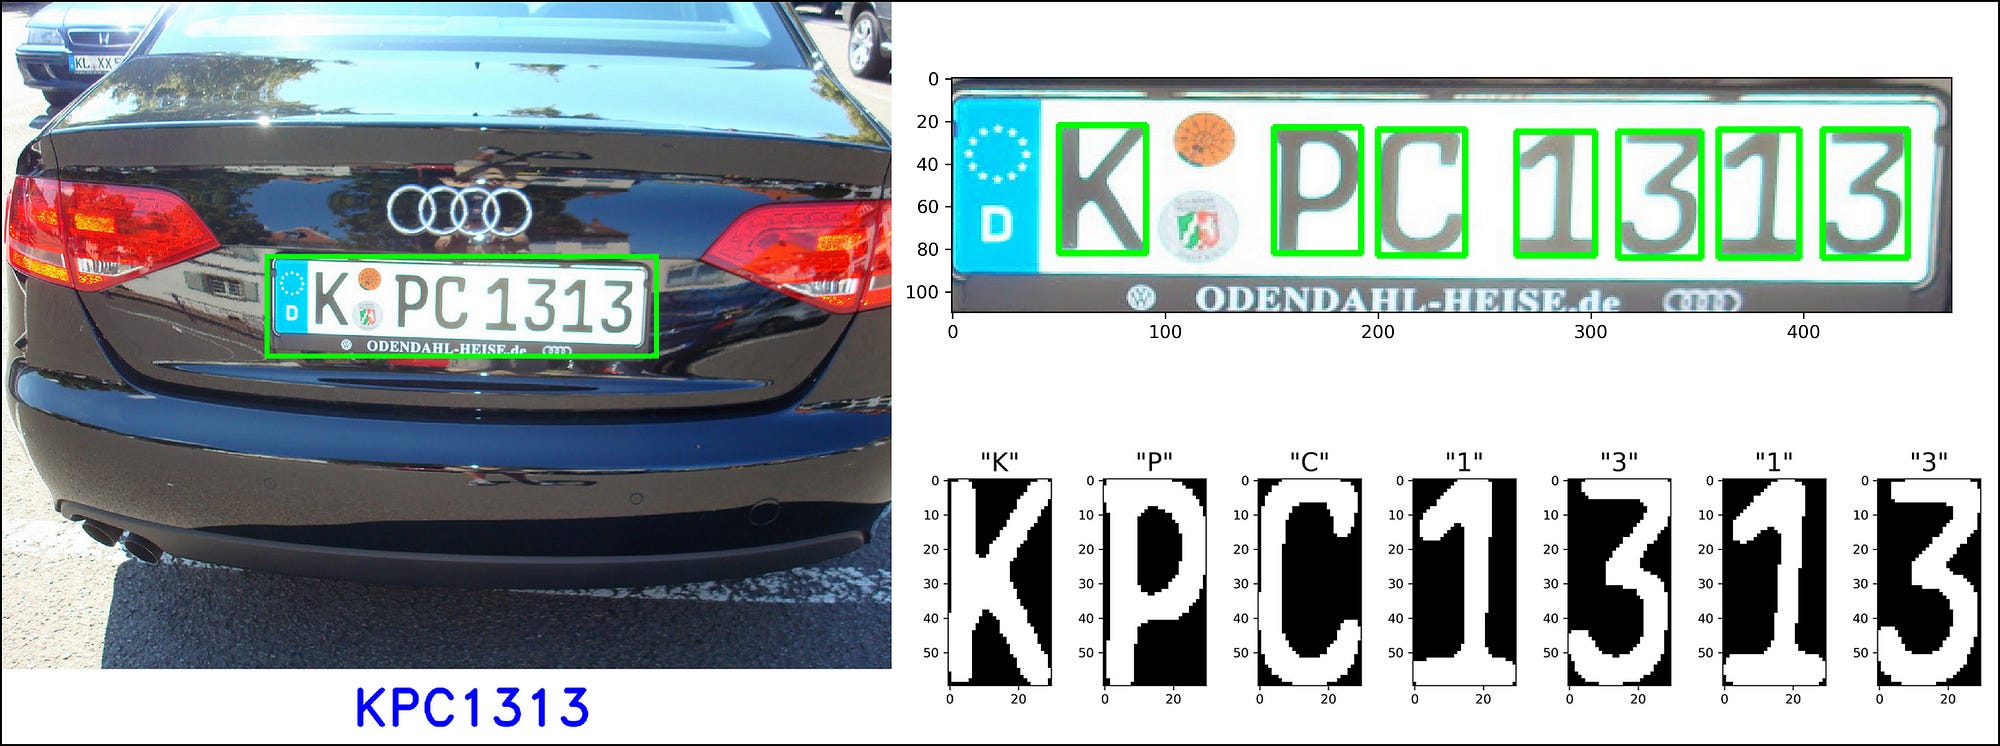 free ocr software to read license plates